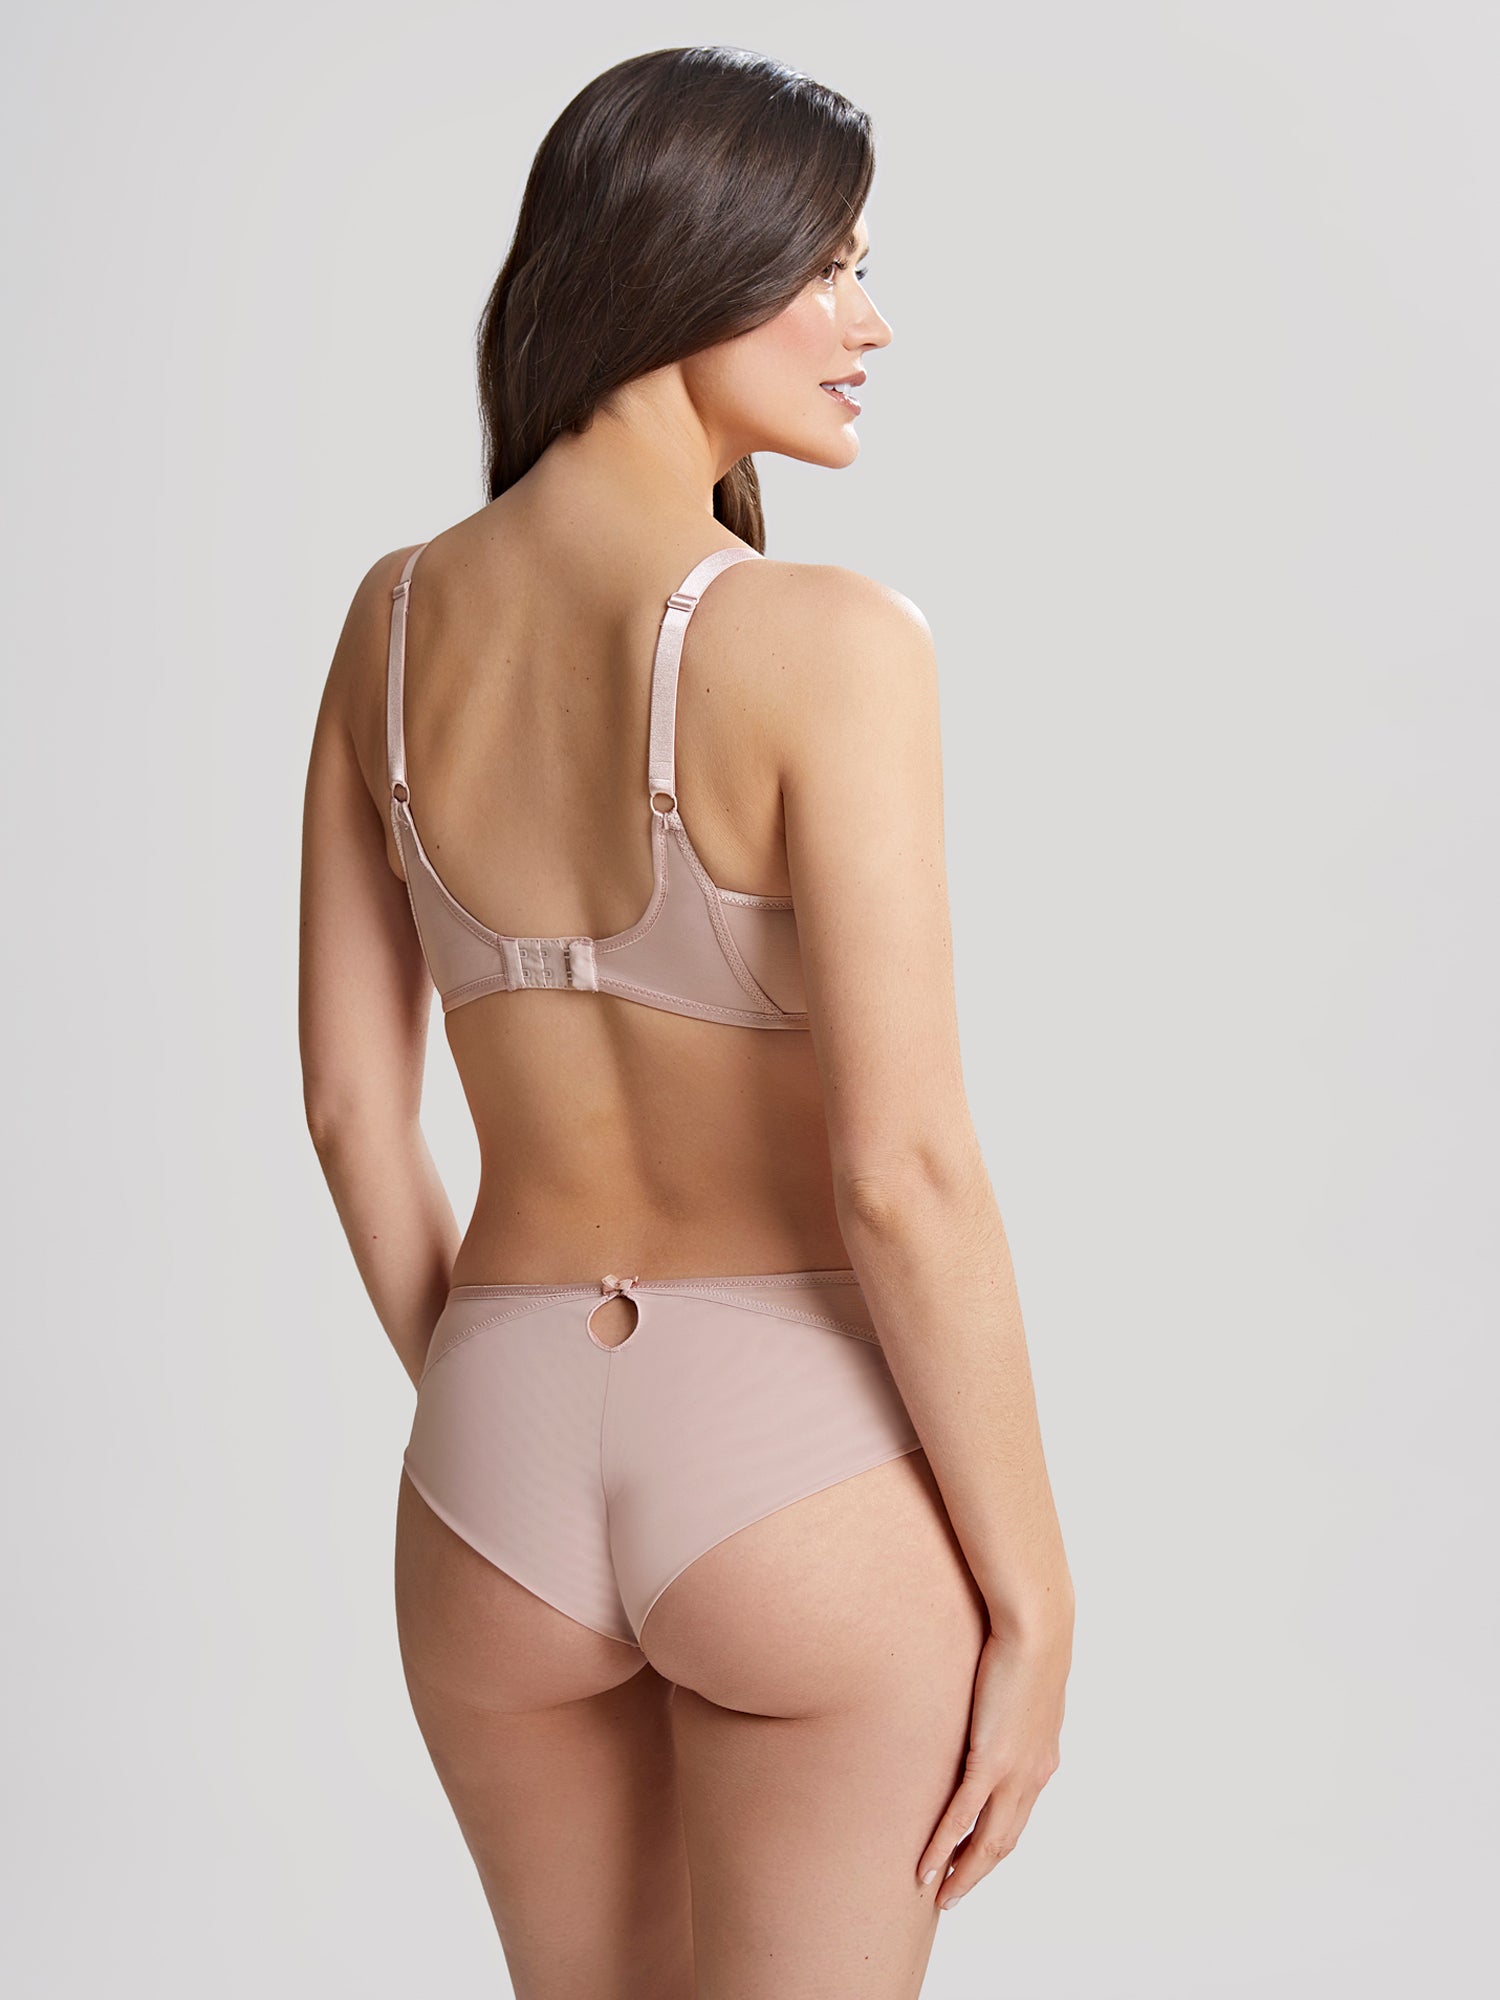 Panache Lingerie - Our Lois balconette gives a great lifted shape, offering  support and style all in one. We're loving its latest Navy shade!💗   #LovePanache #PanacheLingerie #New